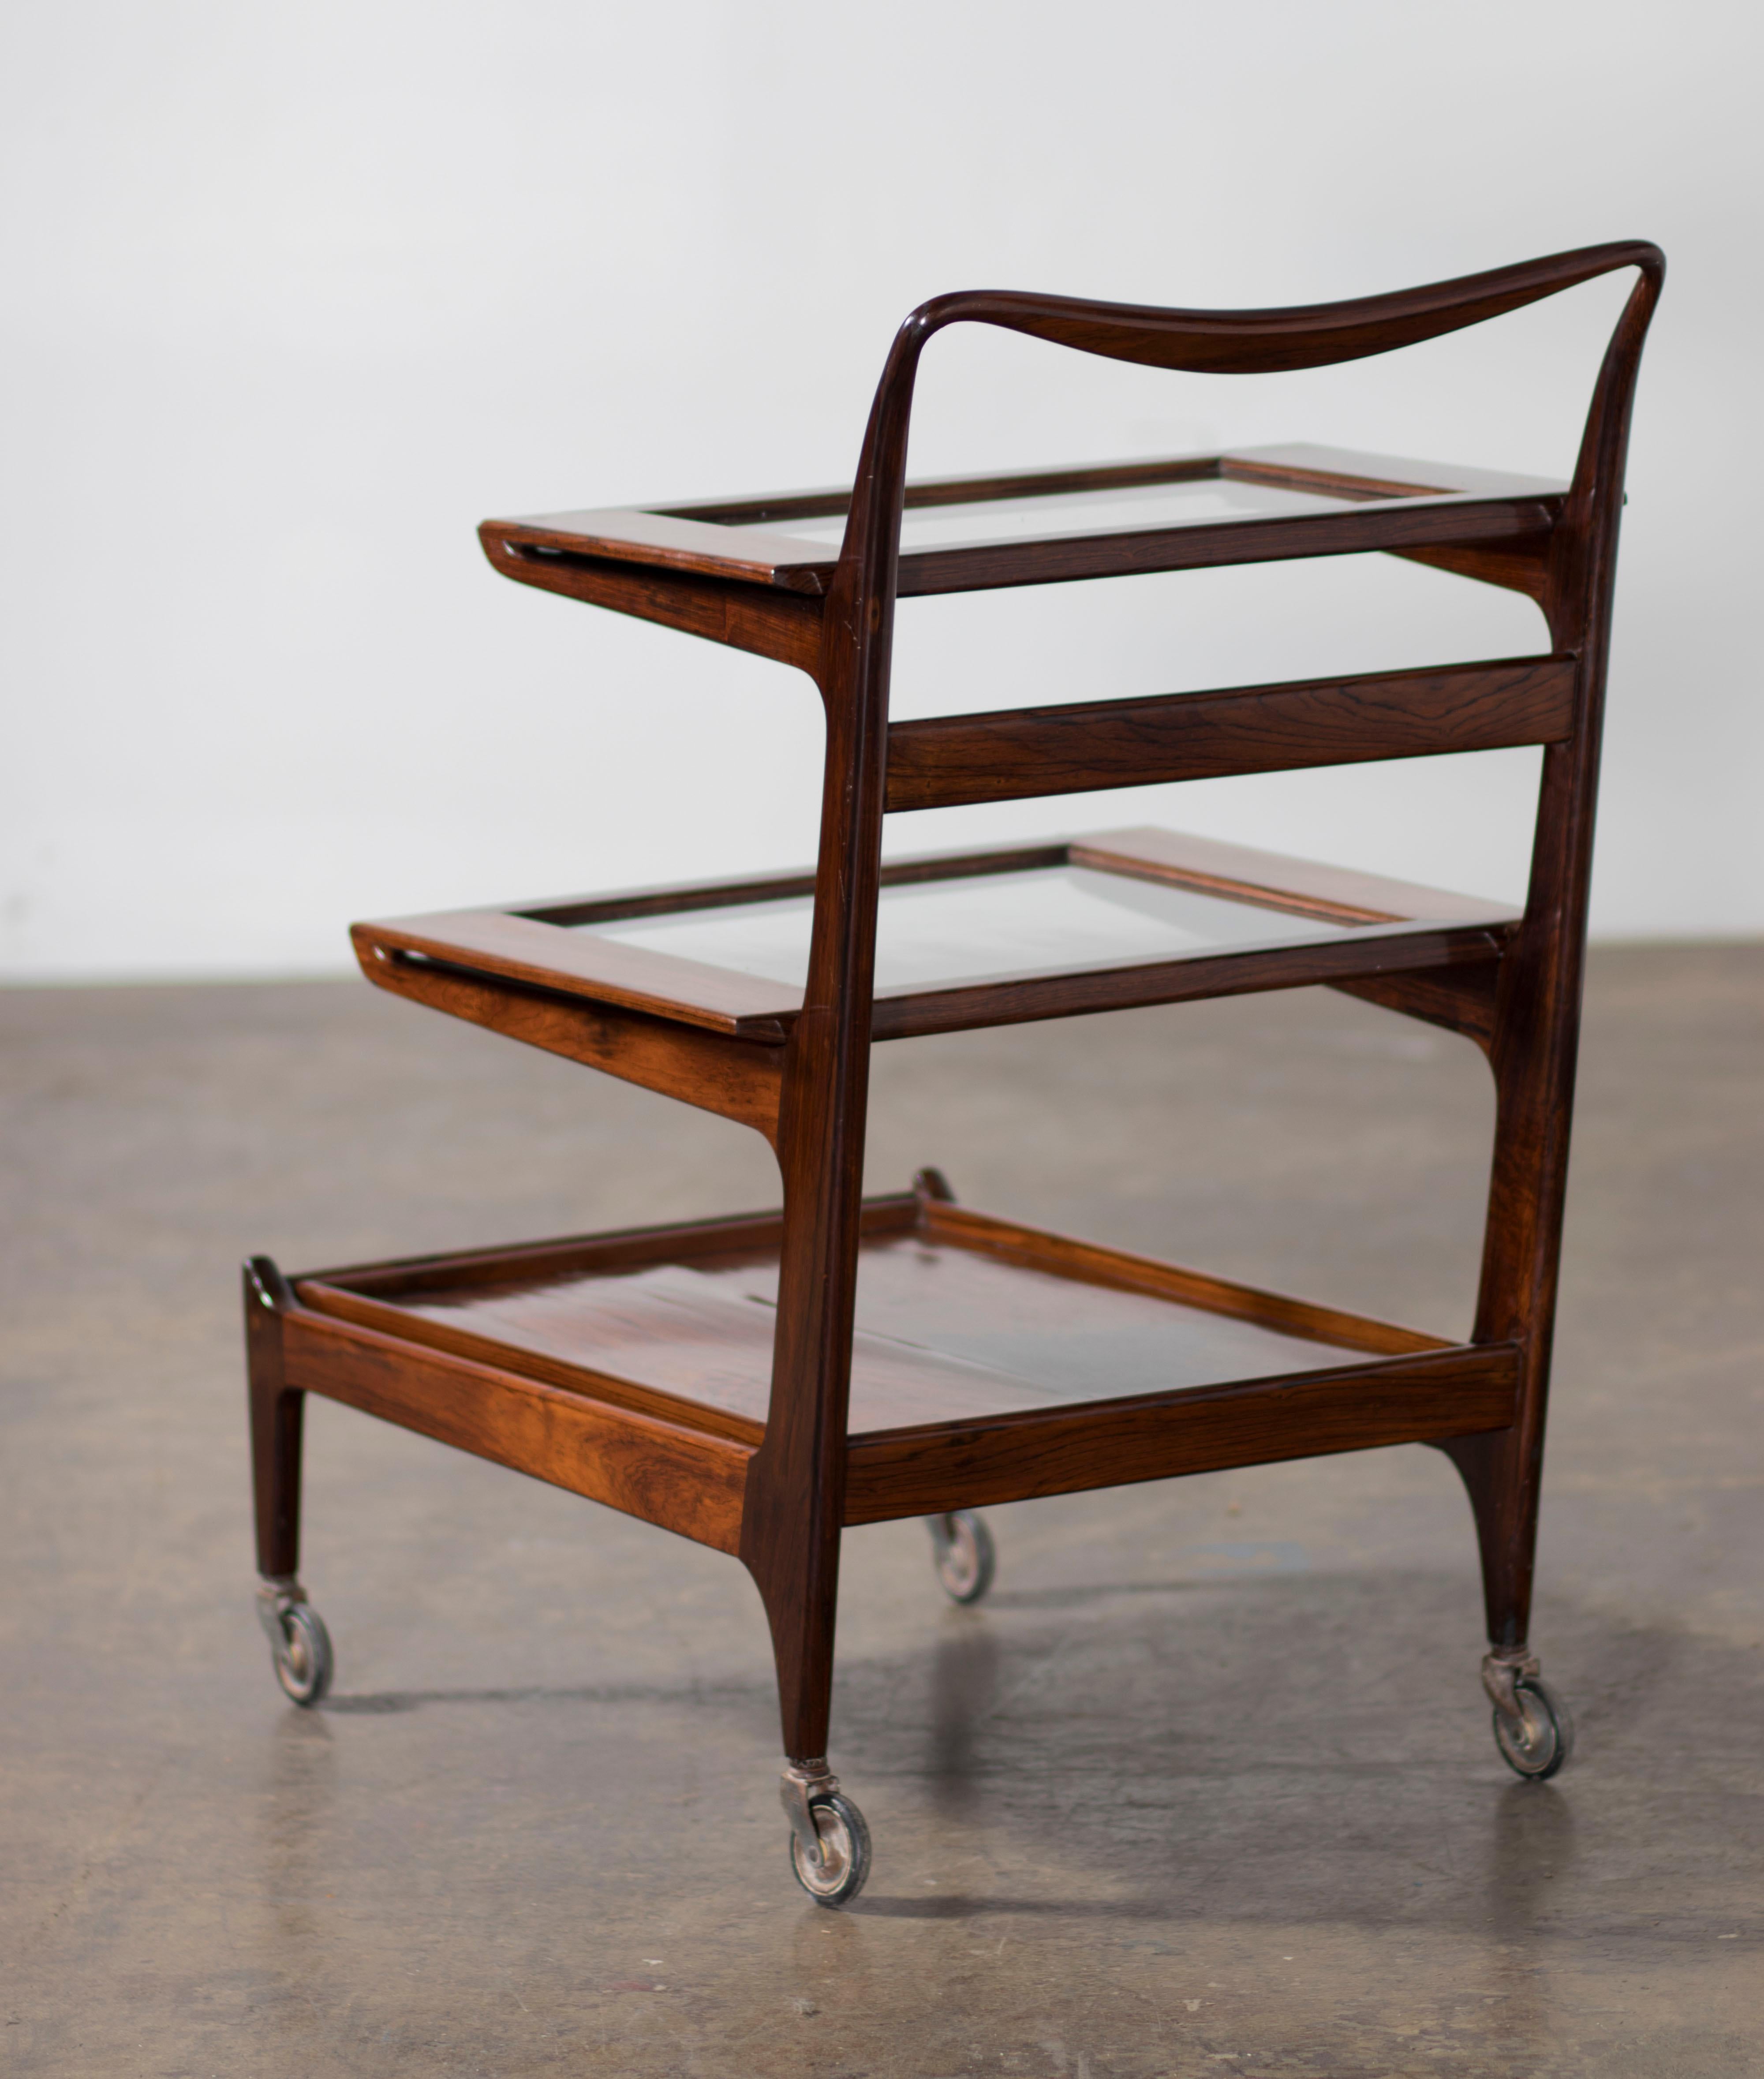 Designed by Carlo Hauner and Martin Eisler, the bar cart is made of Rosewood, Glass, and Steel. Composed of three removable serving trays and steel casters for Forma S/A Móveis e Objetos de Arte, Brazil, São Paulo, 1955.  